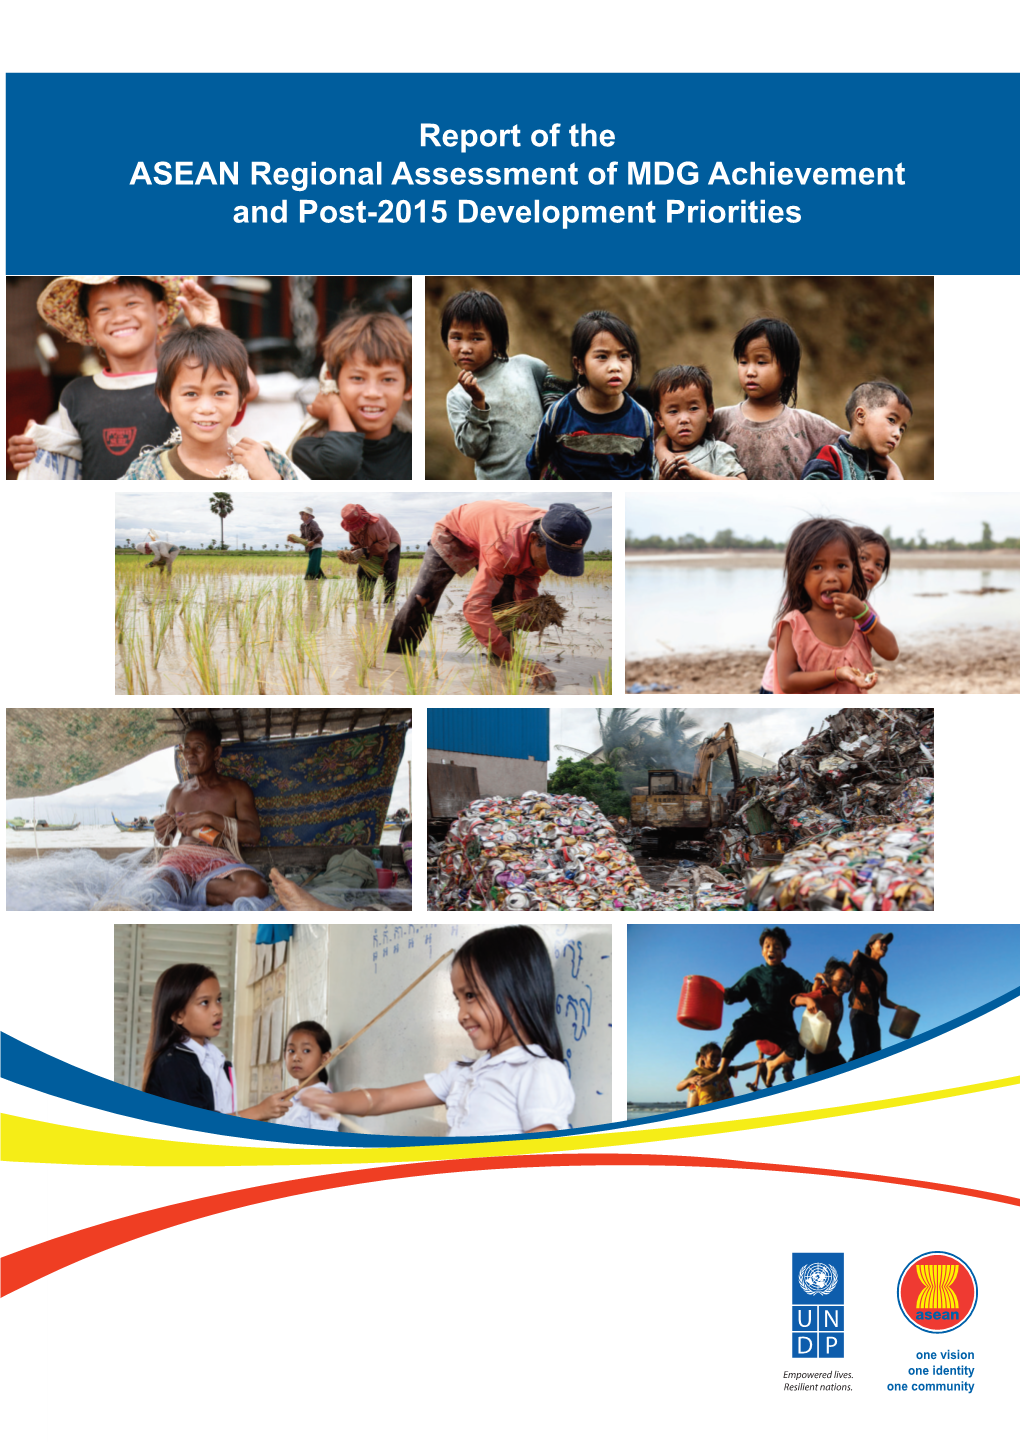 Report of the ASEAN Regional Assessment of MDG Achievement and Post-2015 Development Priorities